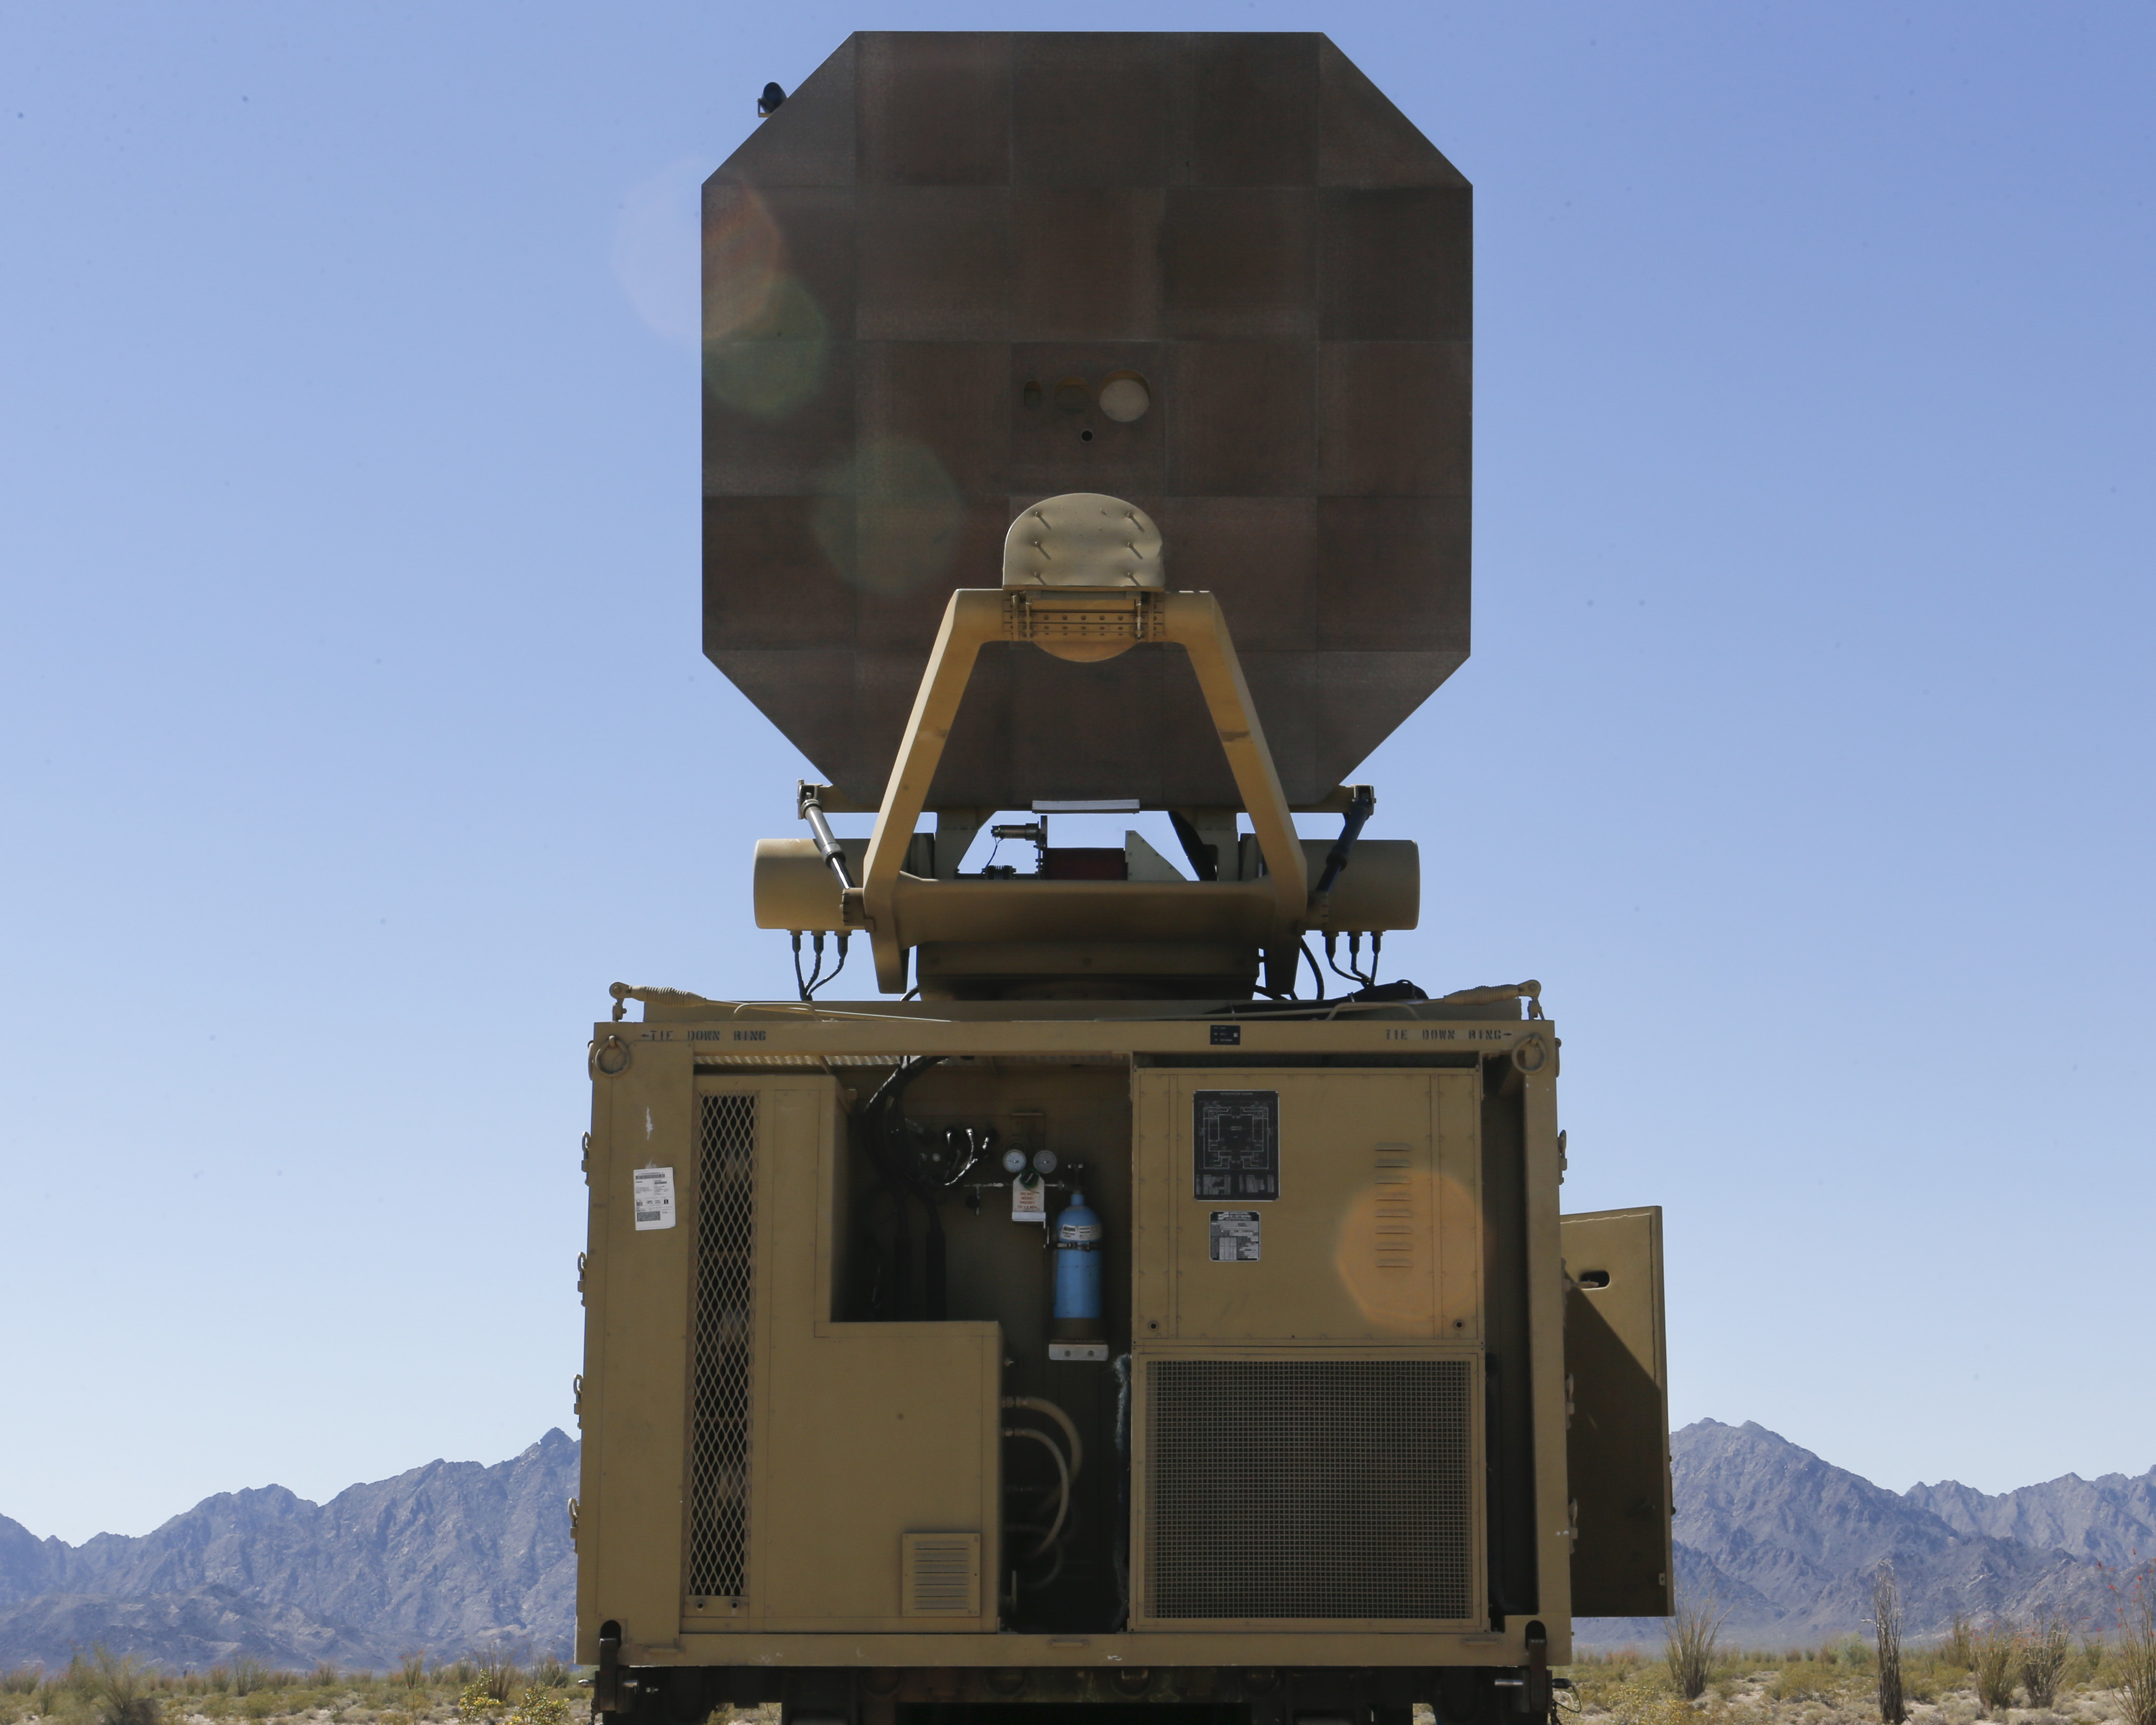 U.S. nonlethal microwave weapon haltS the engine of an approaching